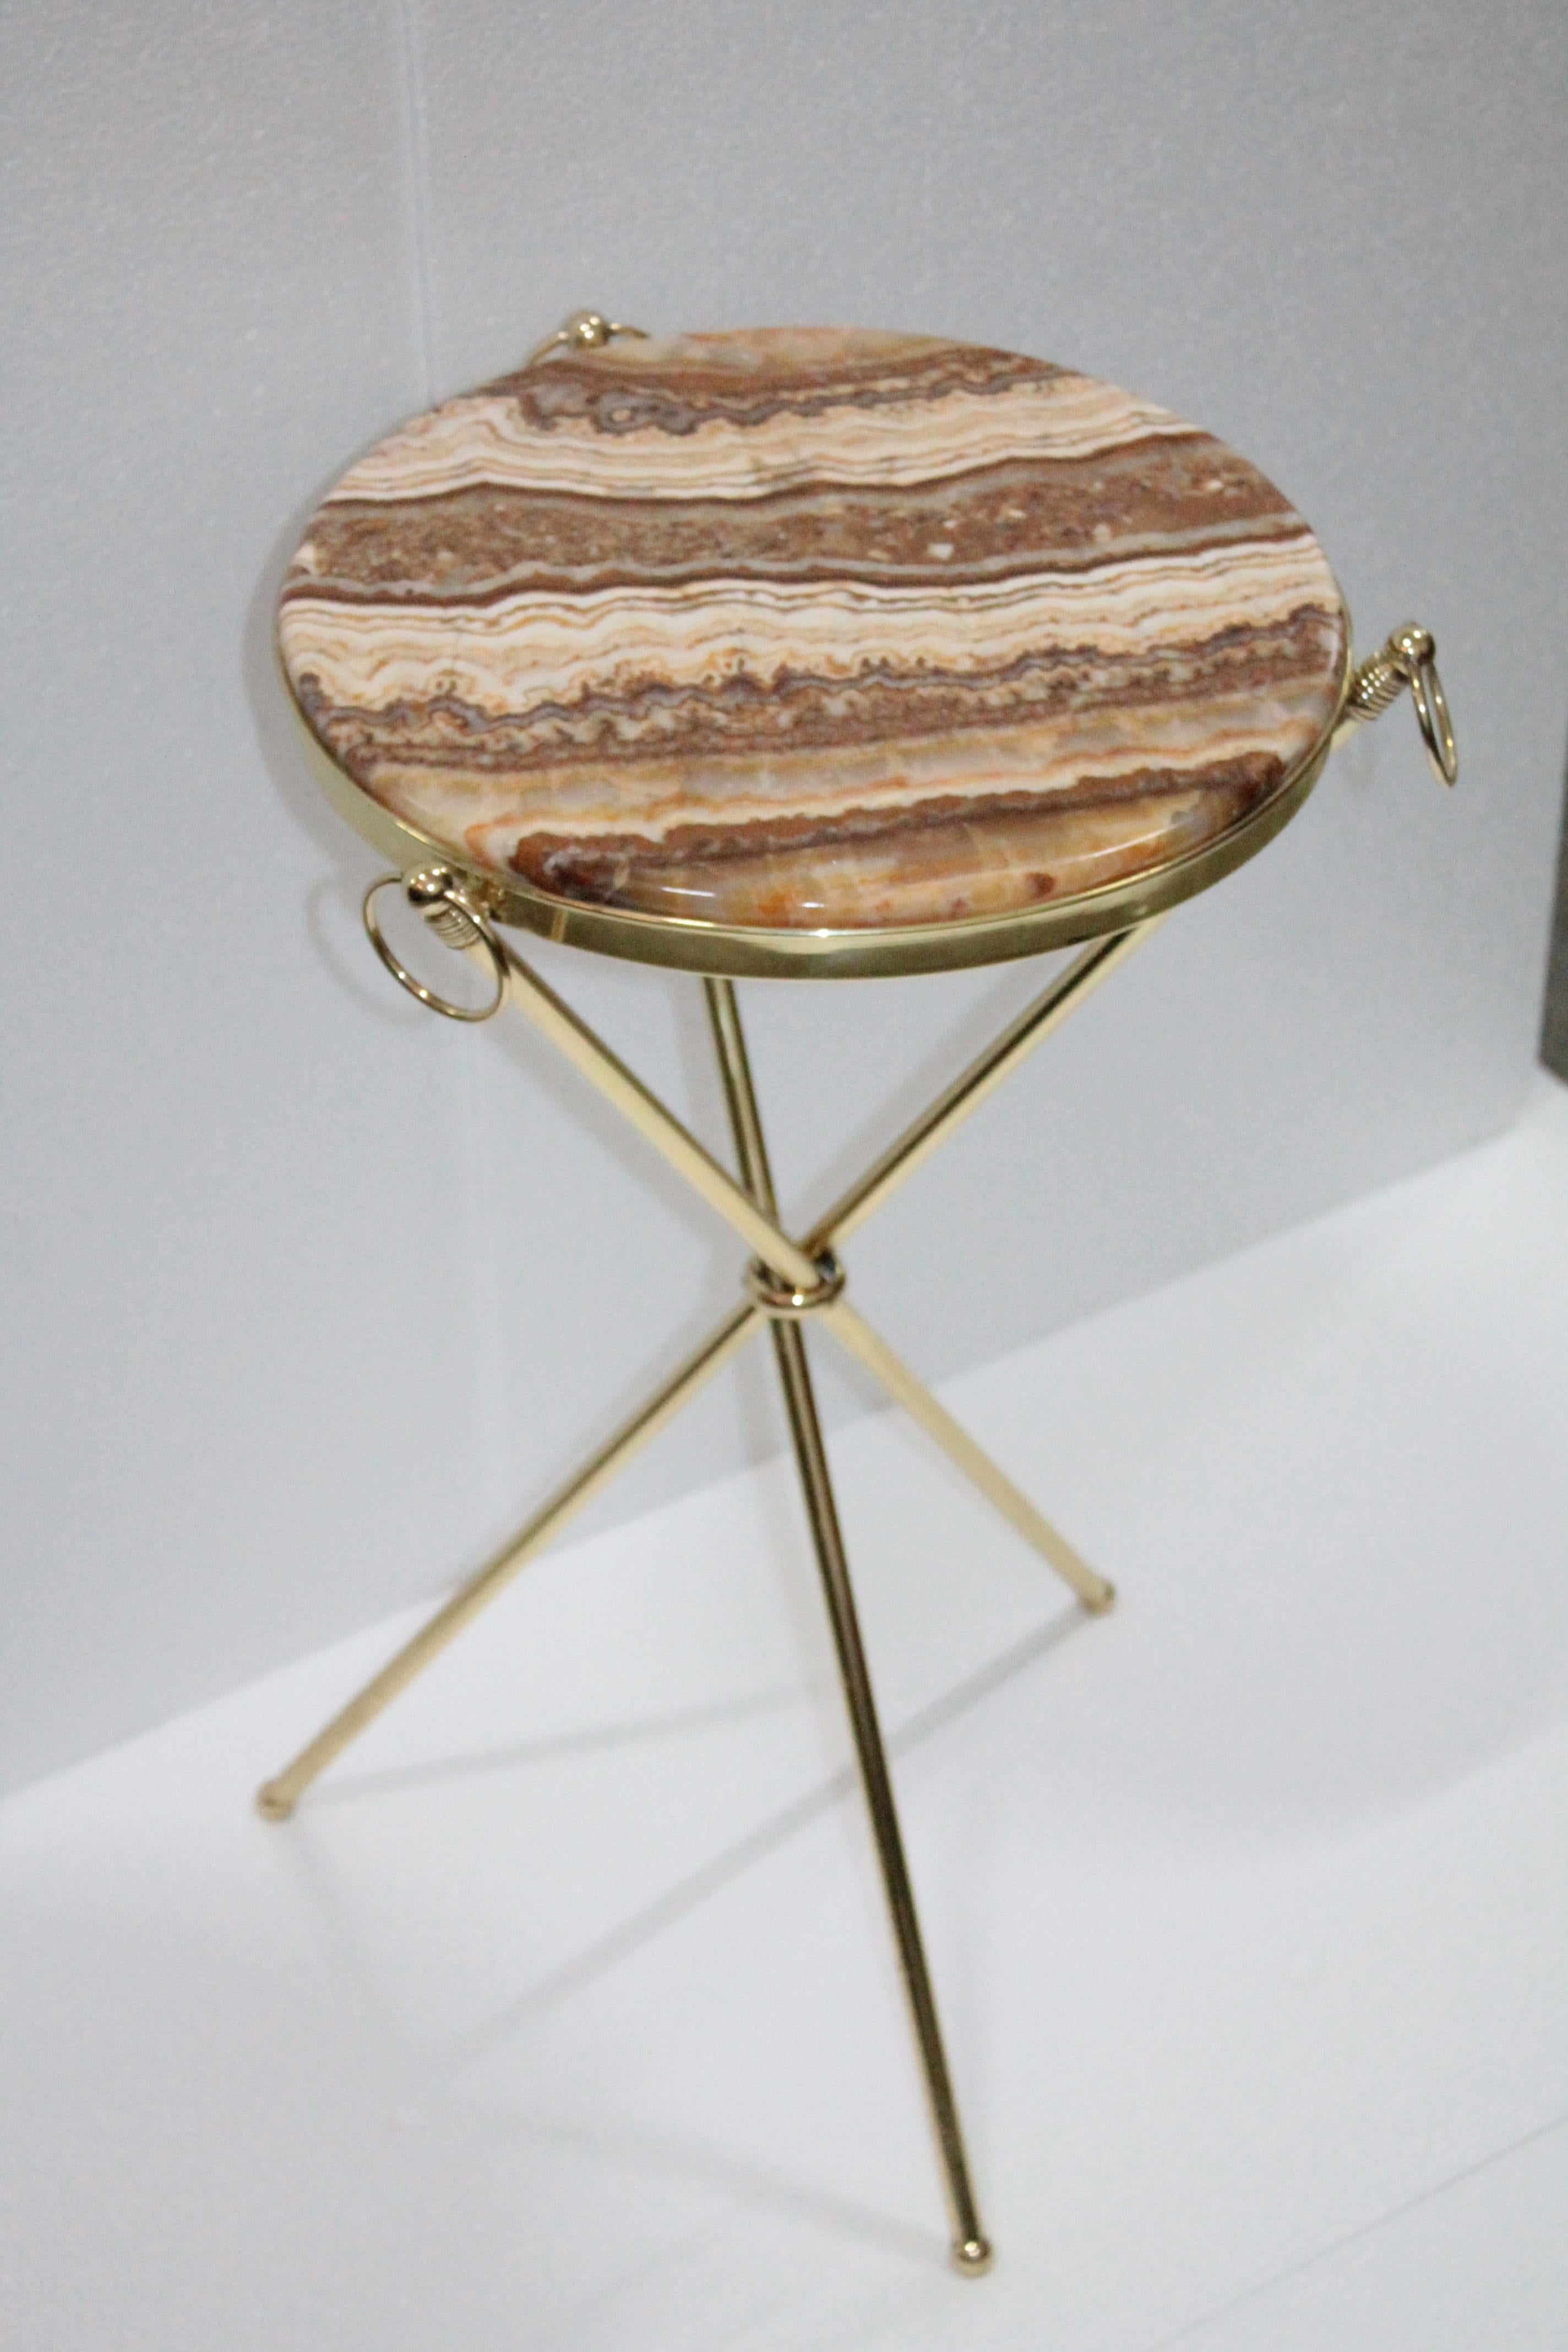 Midcentury Italian Tripod Round Side Table 1950s Brass and Onyx Marble 5